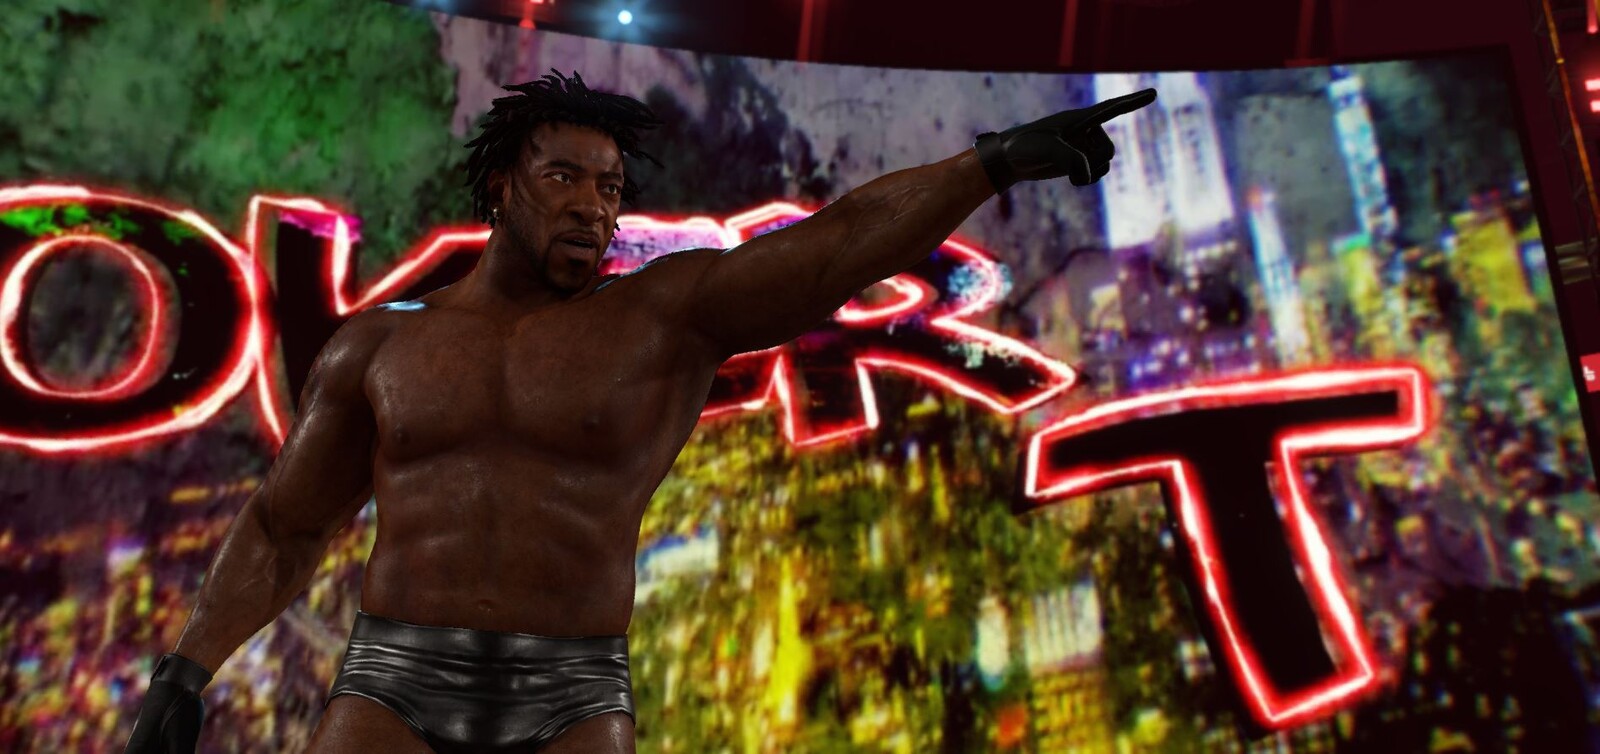 Booker T
Based on his 2001 attire